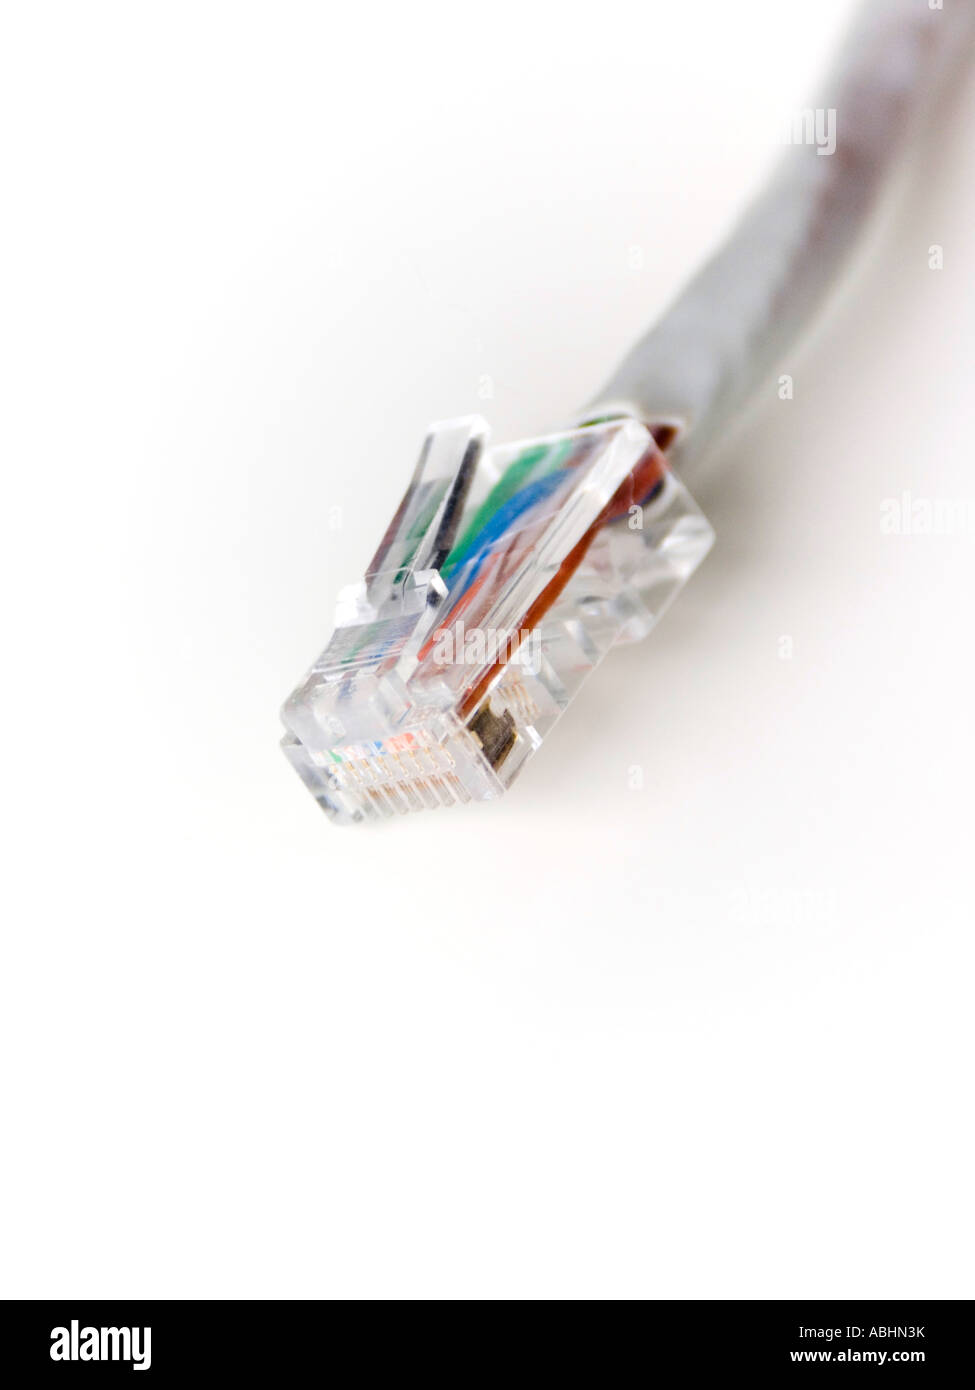 pc rj 45 Ethernet Internet plug cable close up on a white background Stock Photo